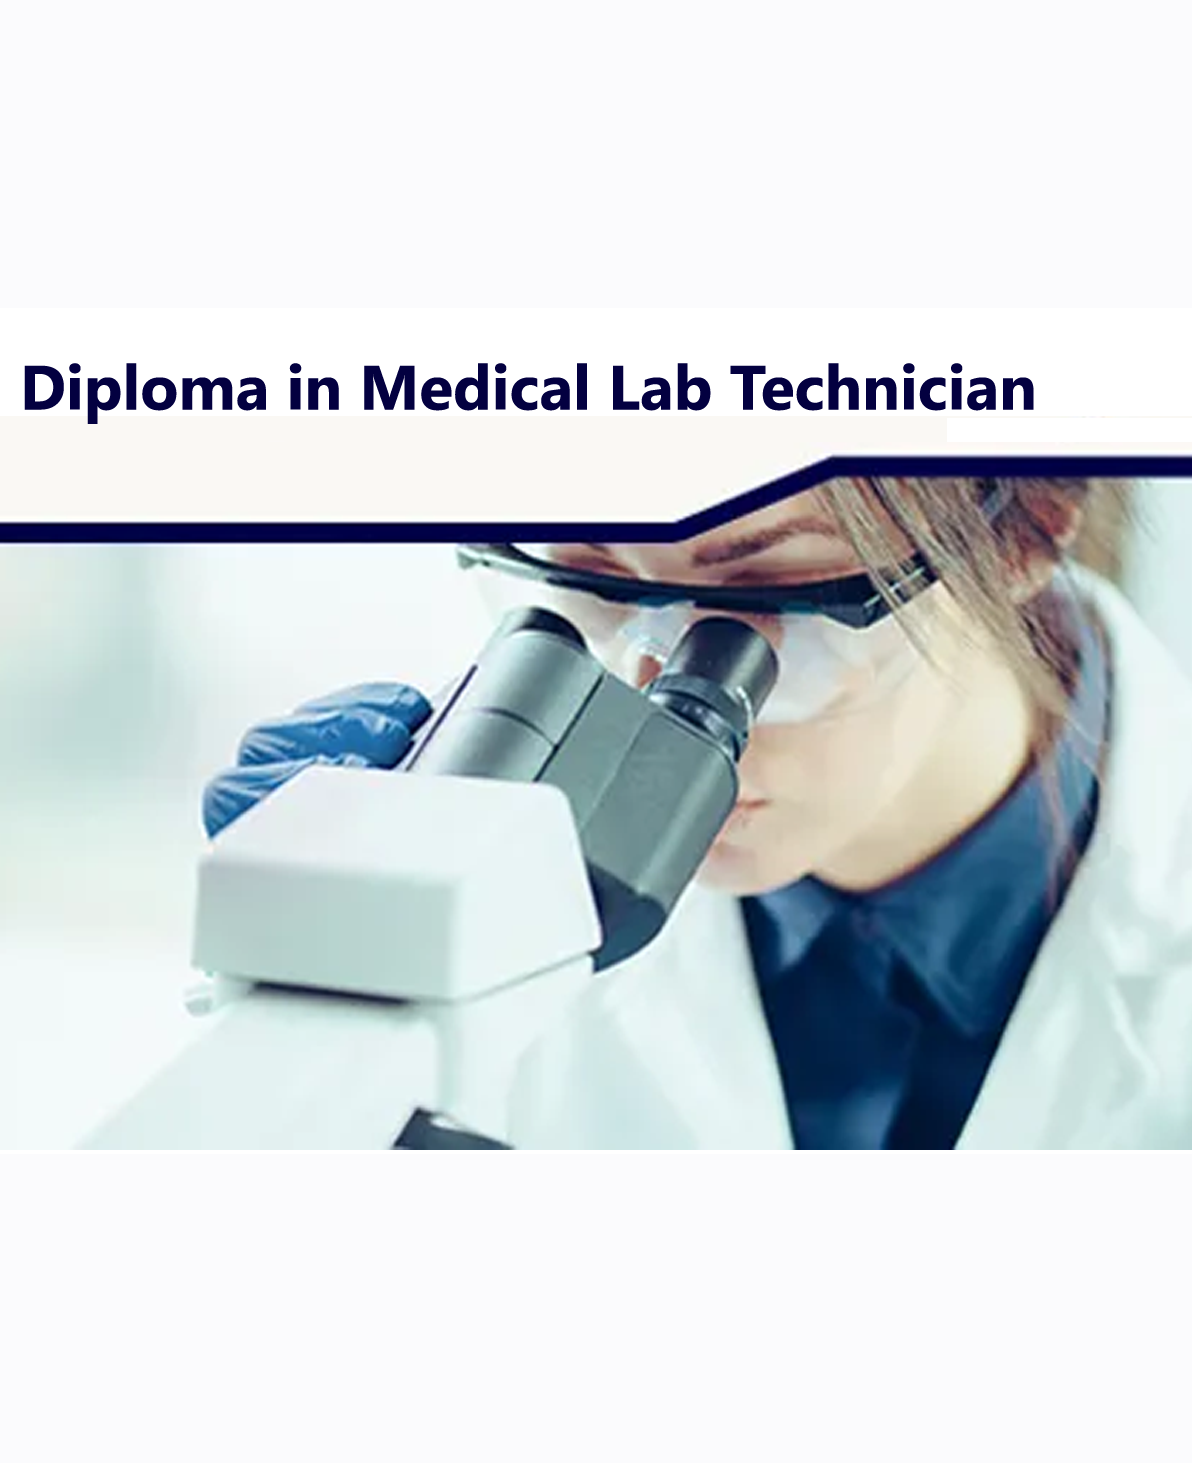 Diploma in Medical Lab Technician